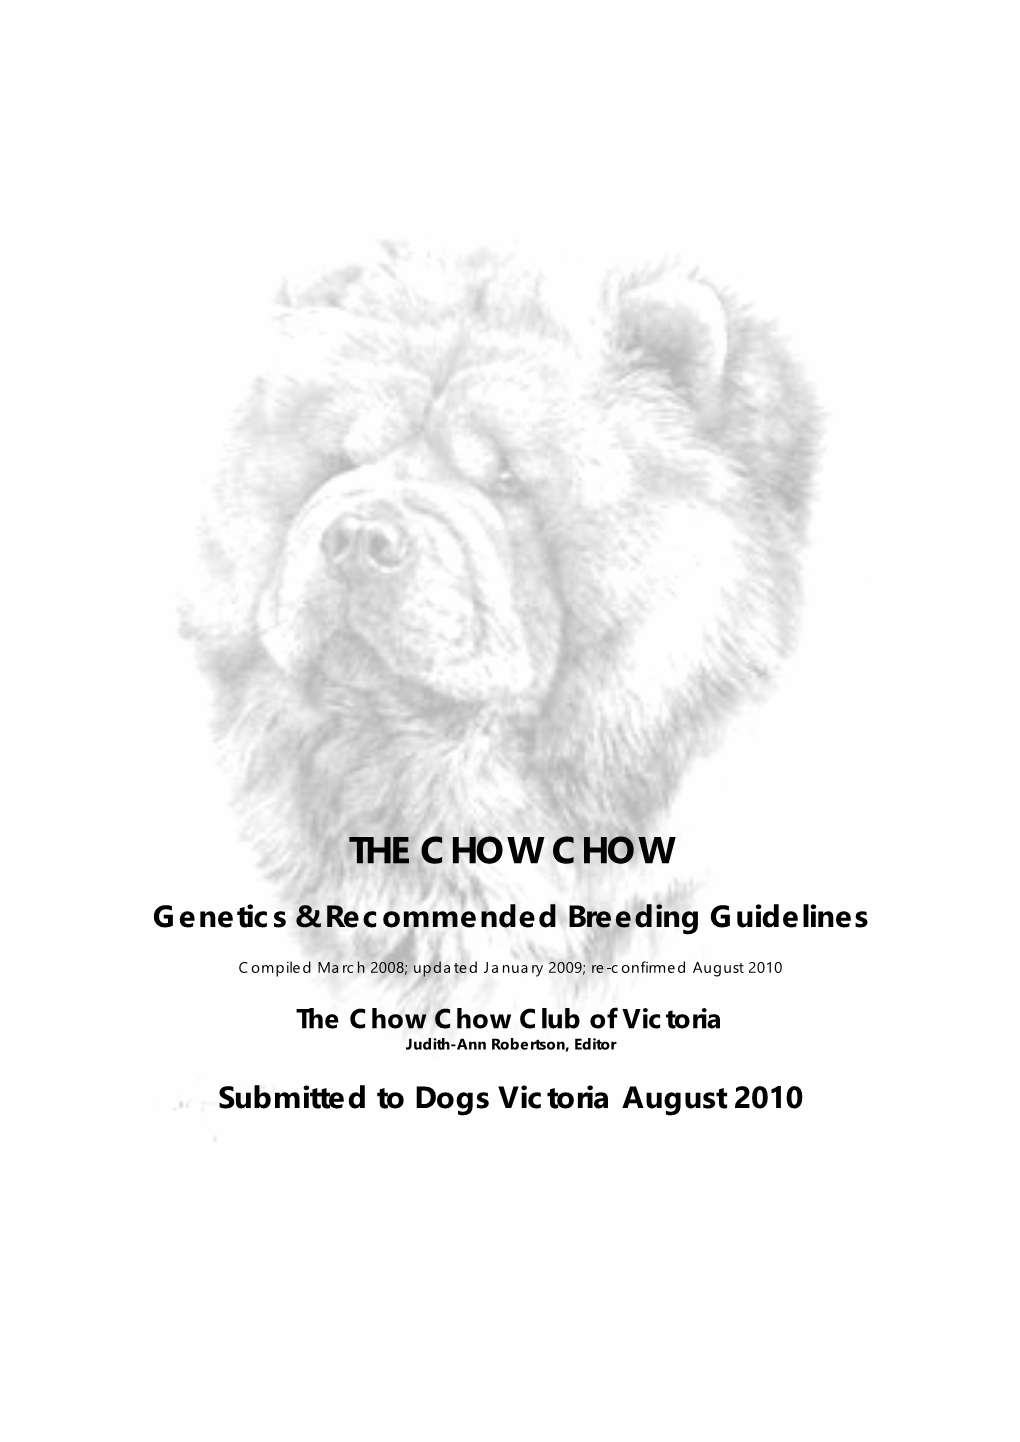 Breeding Guidelines-Chow Chow